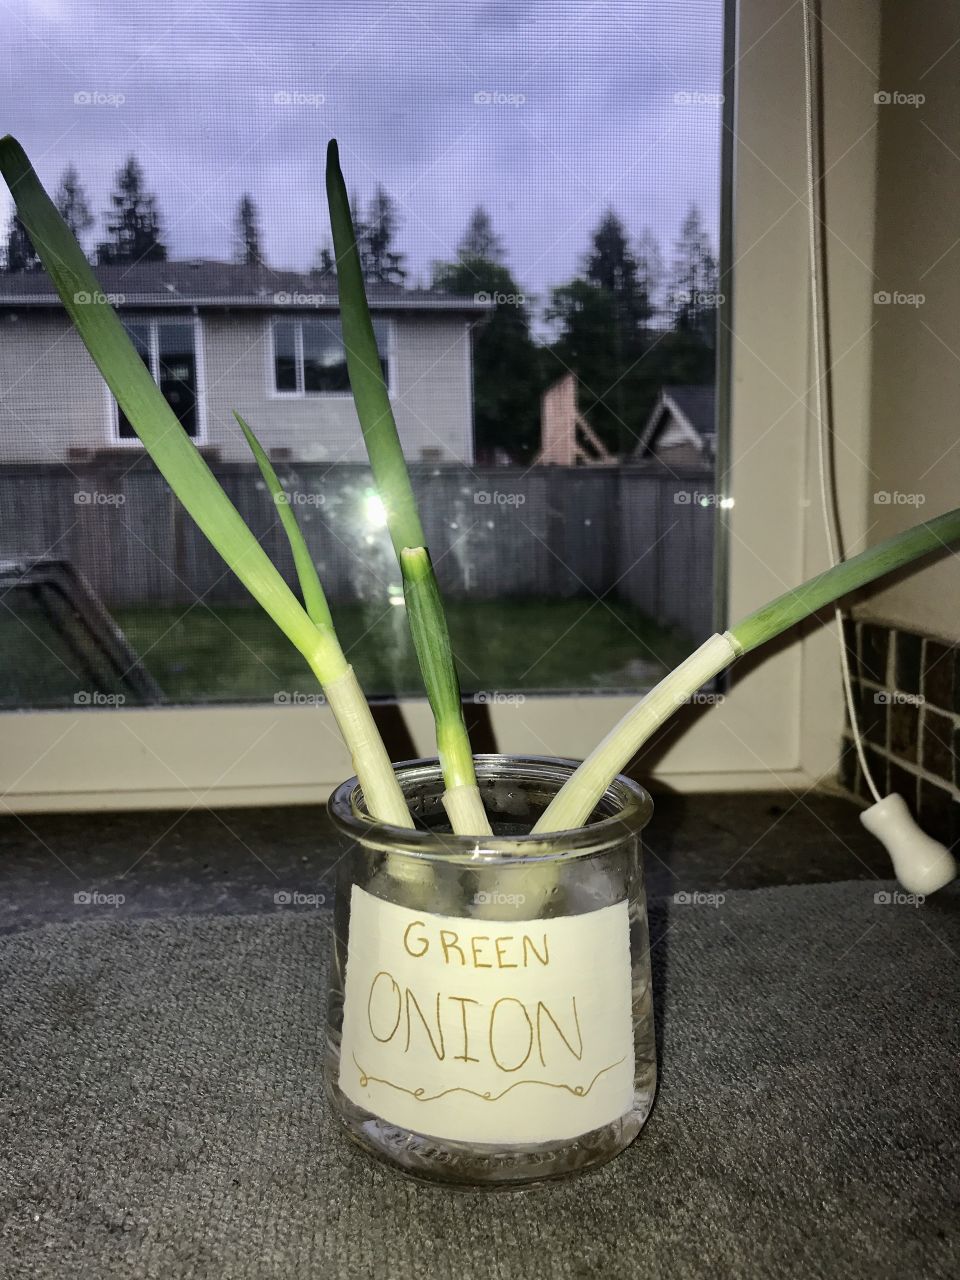 Home grown green onions growing in an up cycled pot with a hand painted label, growing well